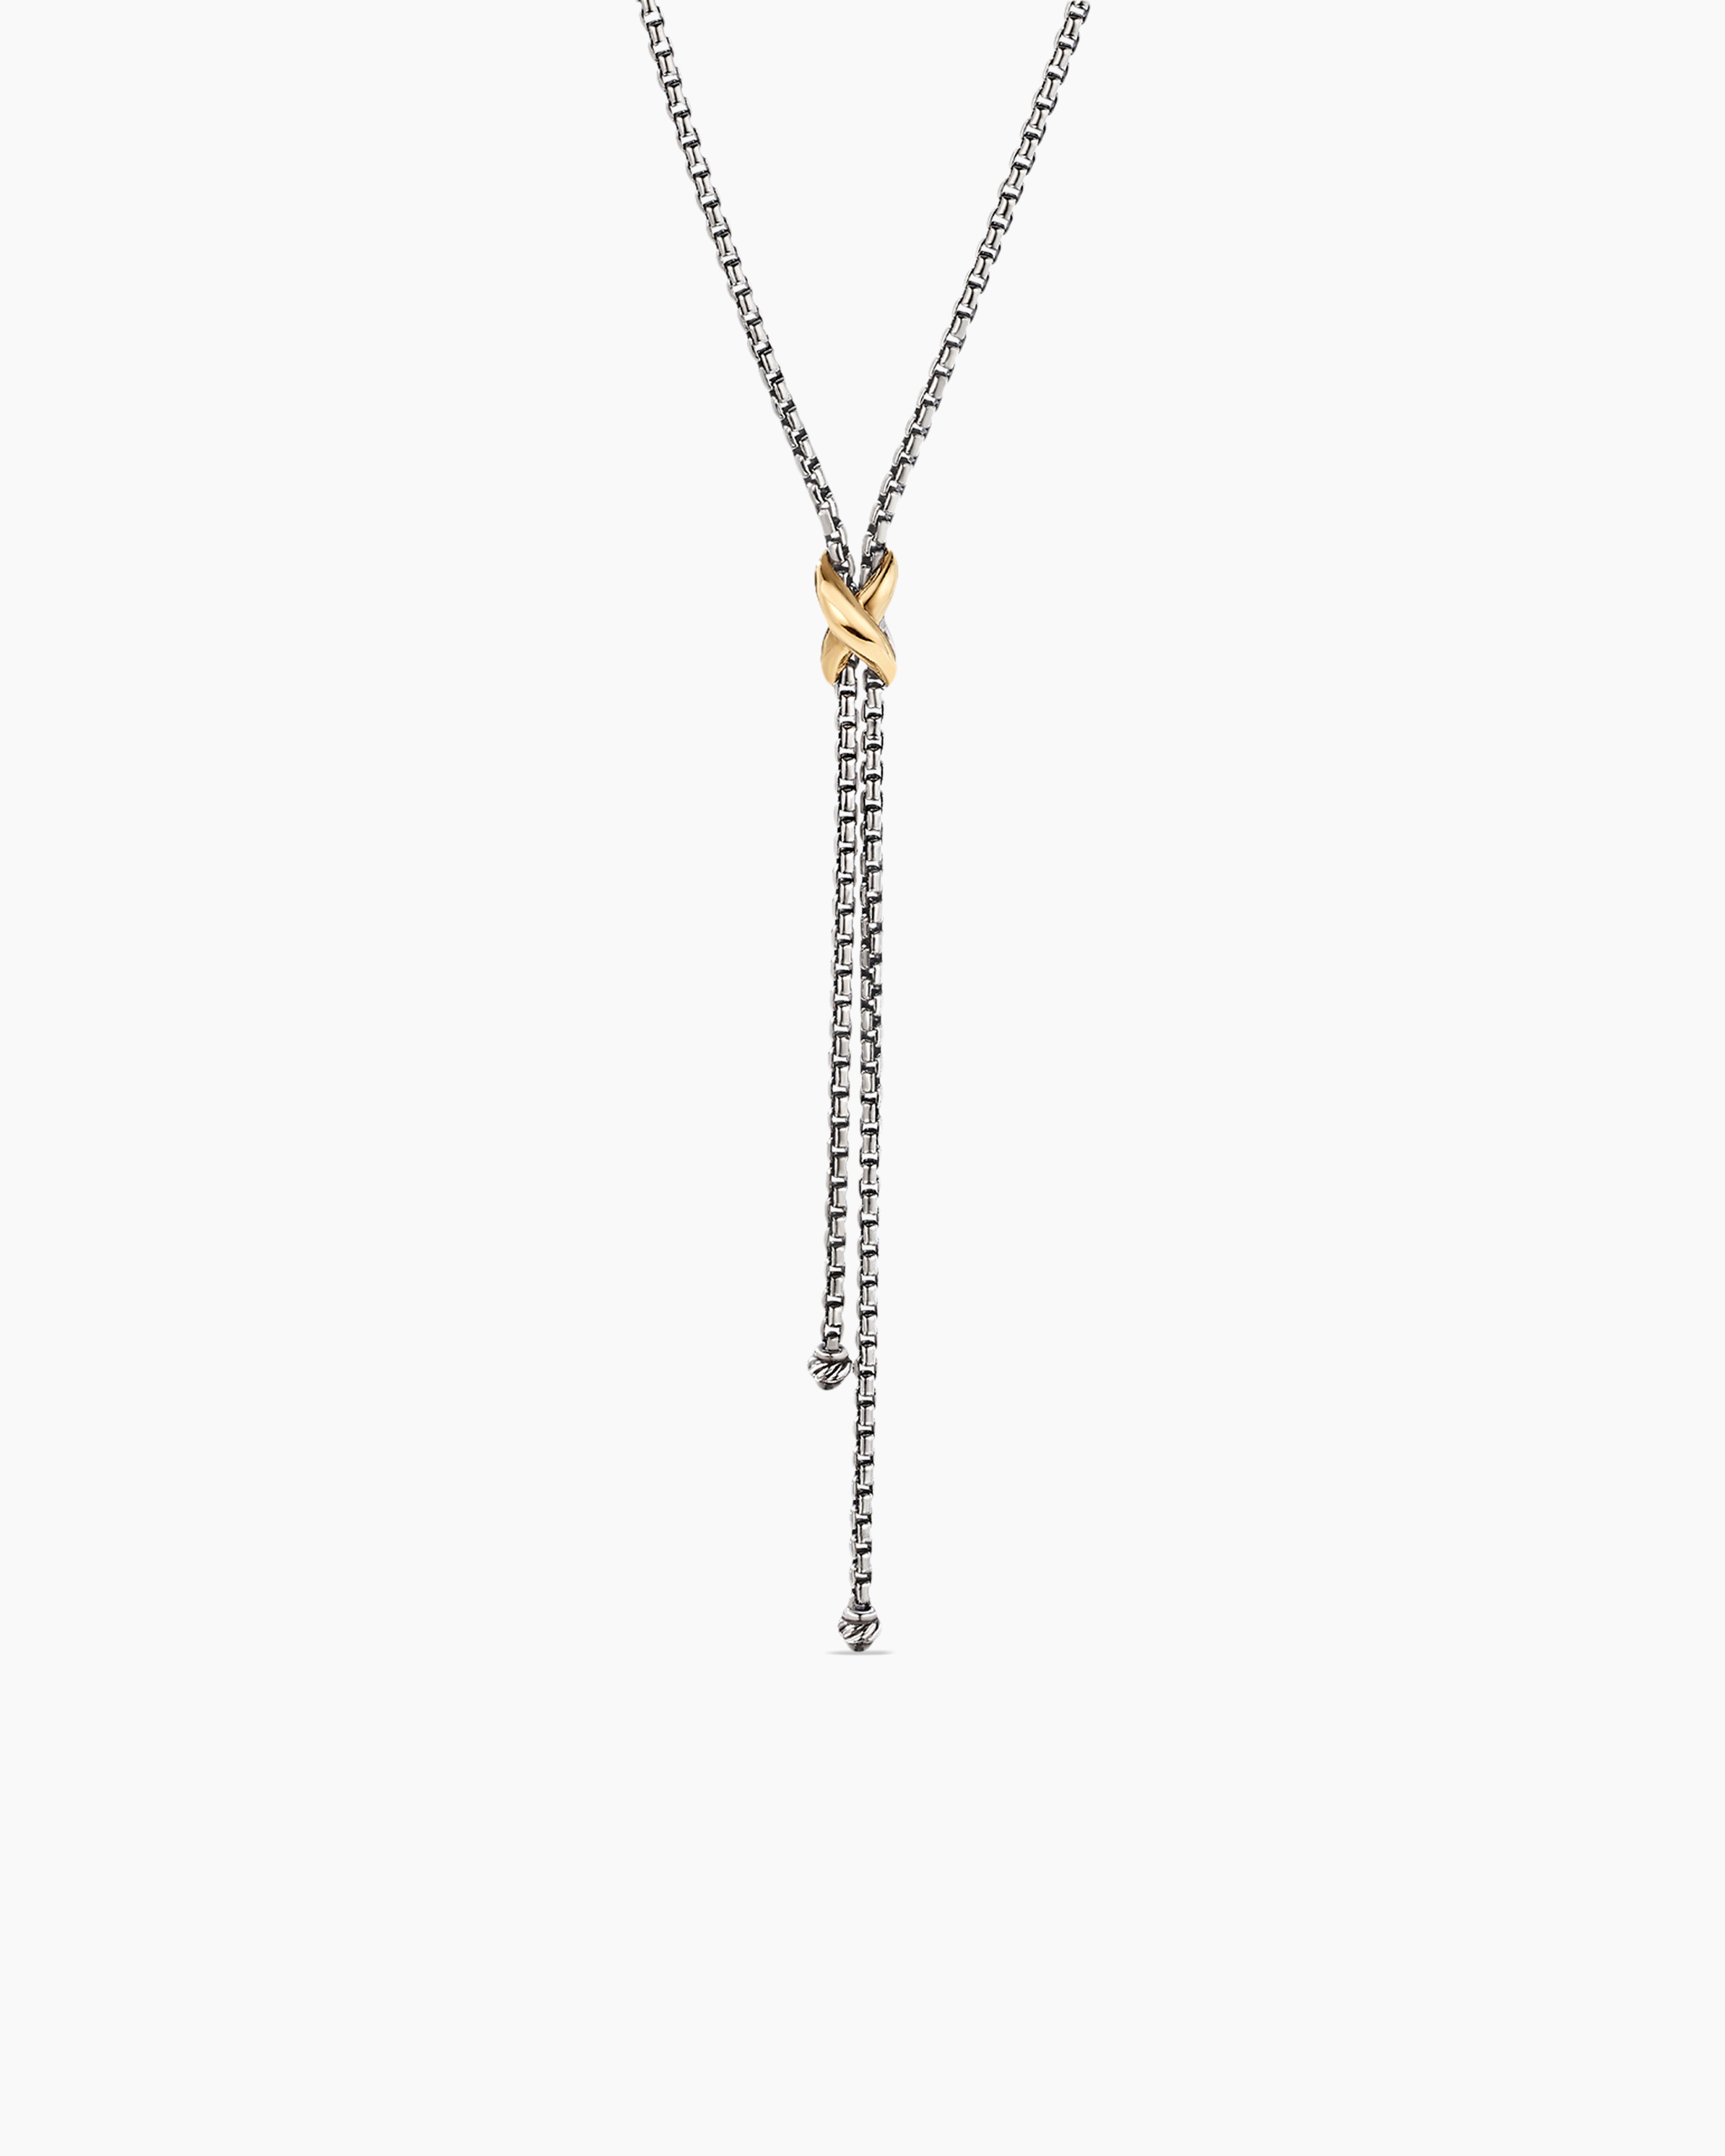 Gold Lariat Necklace with Gold Dome